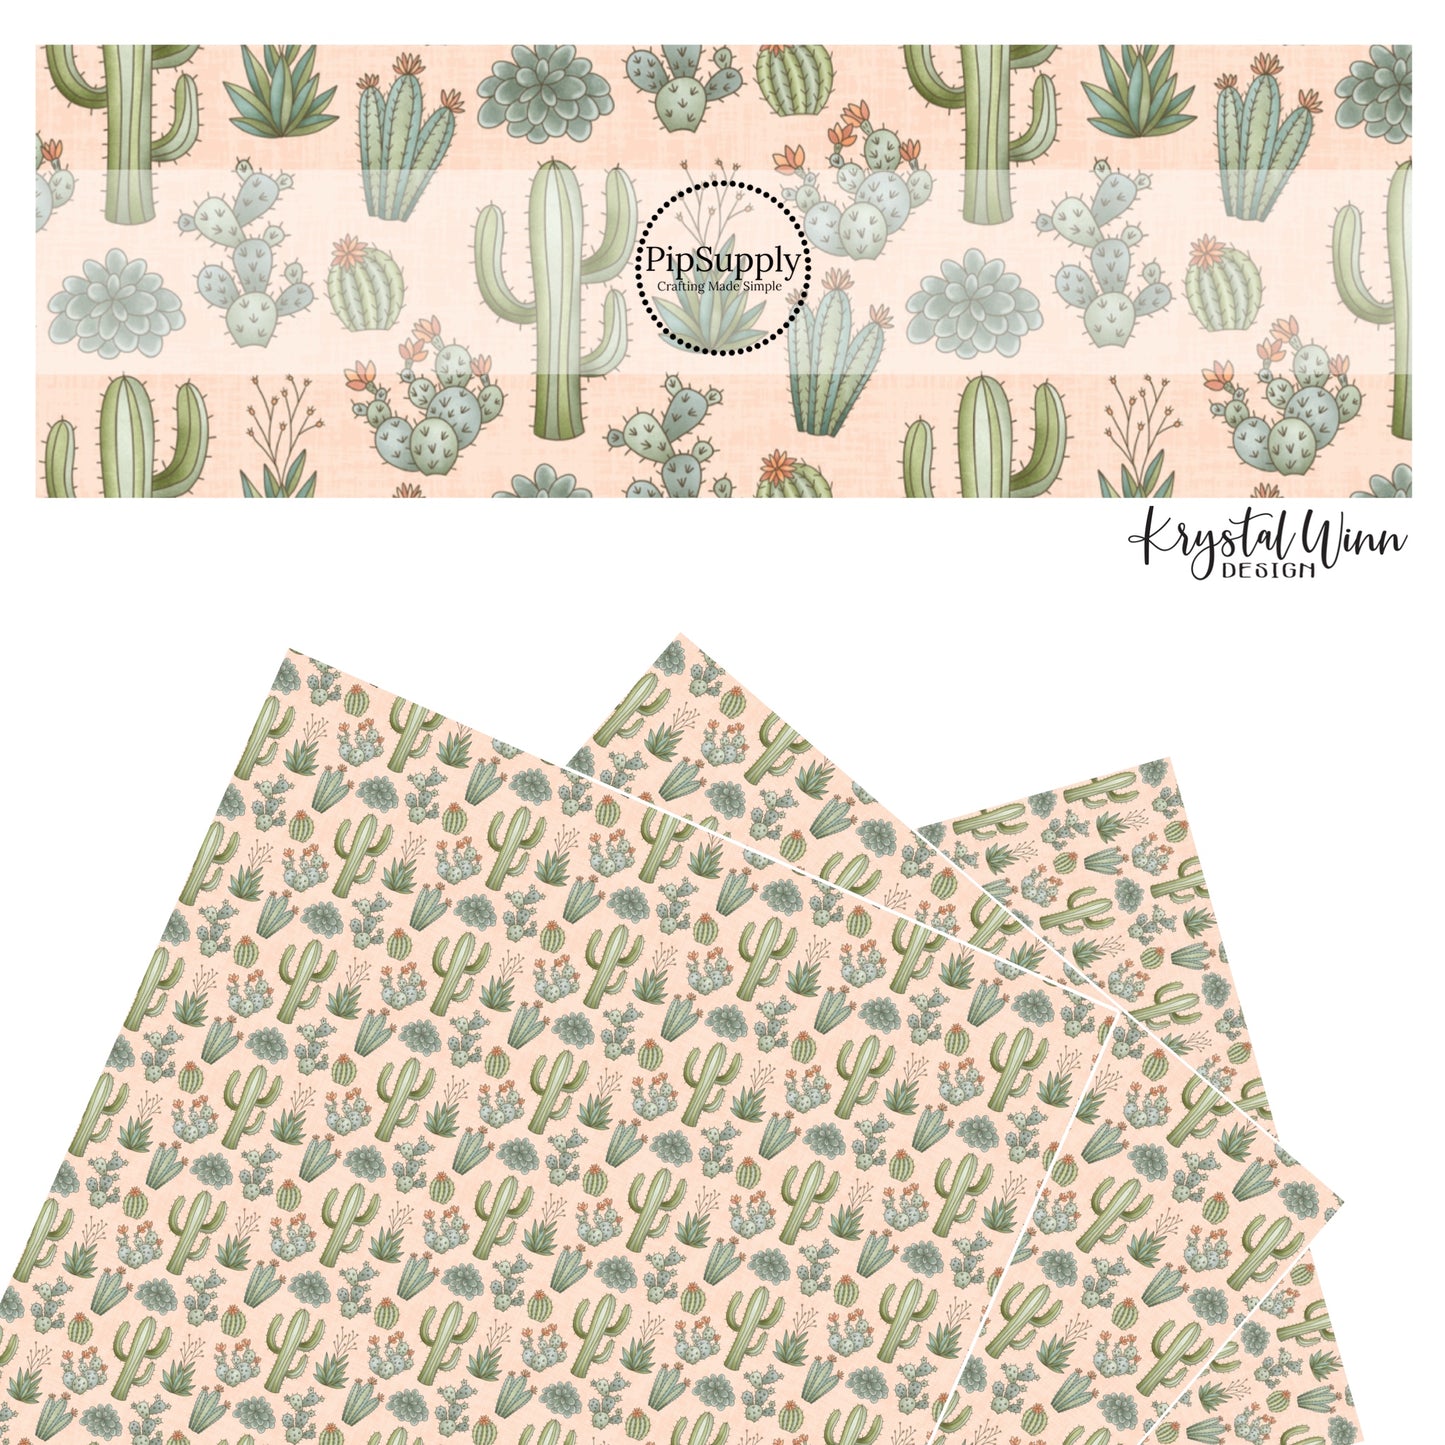 These small pink desert flowers and cacti on light blush faux leather sheets contain the following design elements: green flowers and cacti plants.